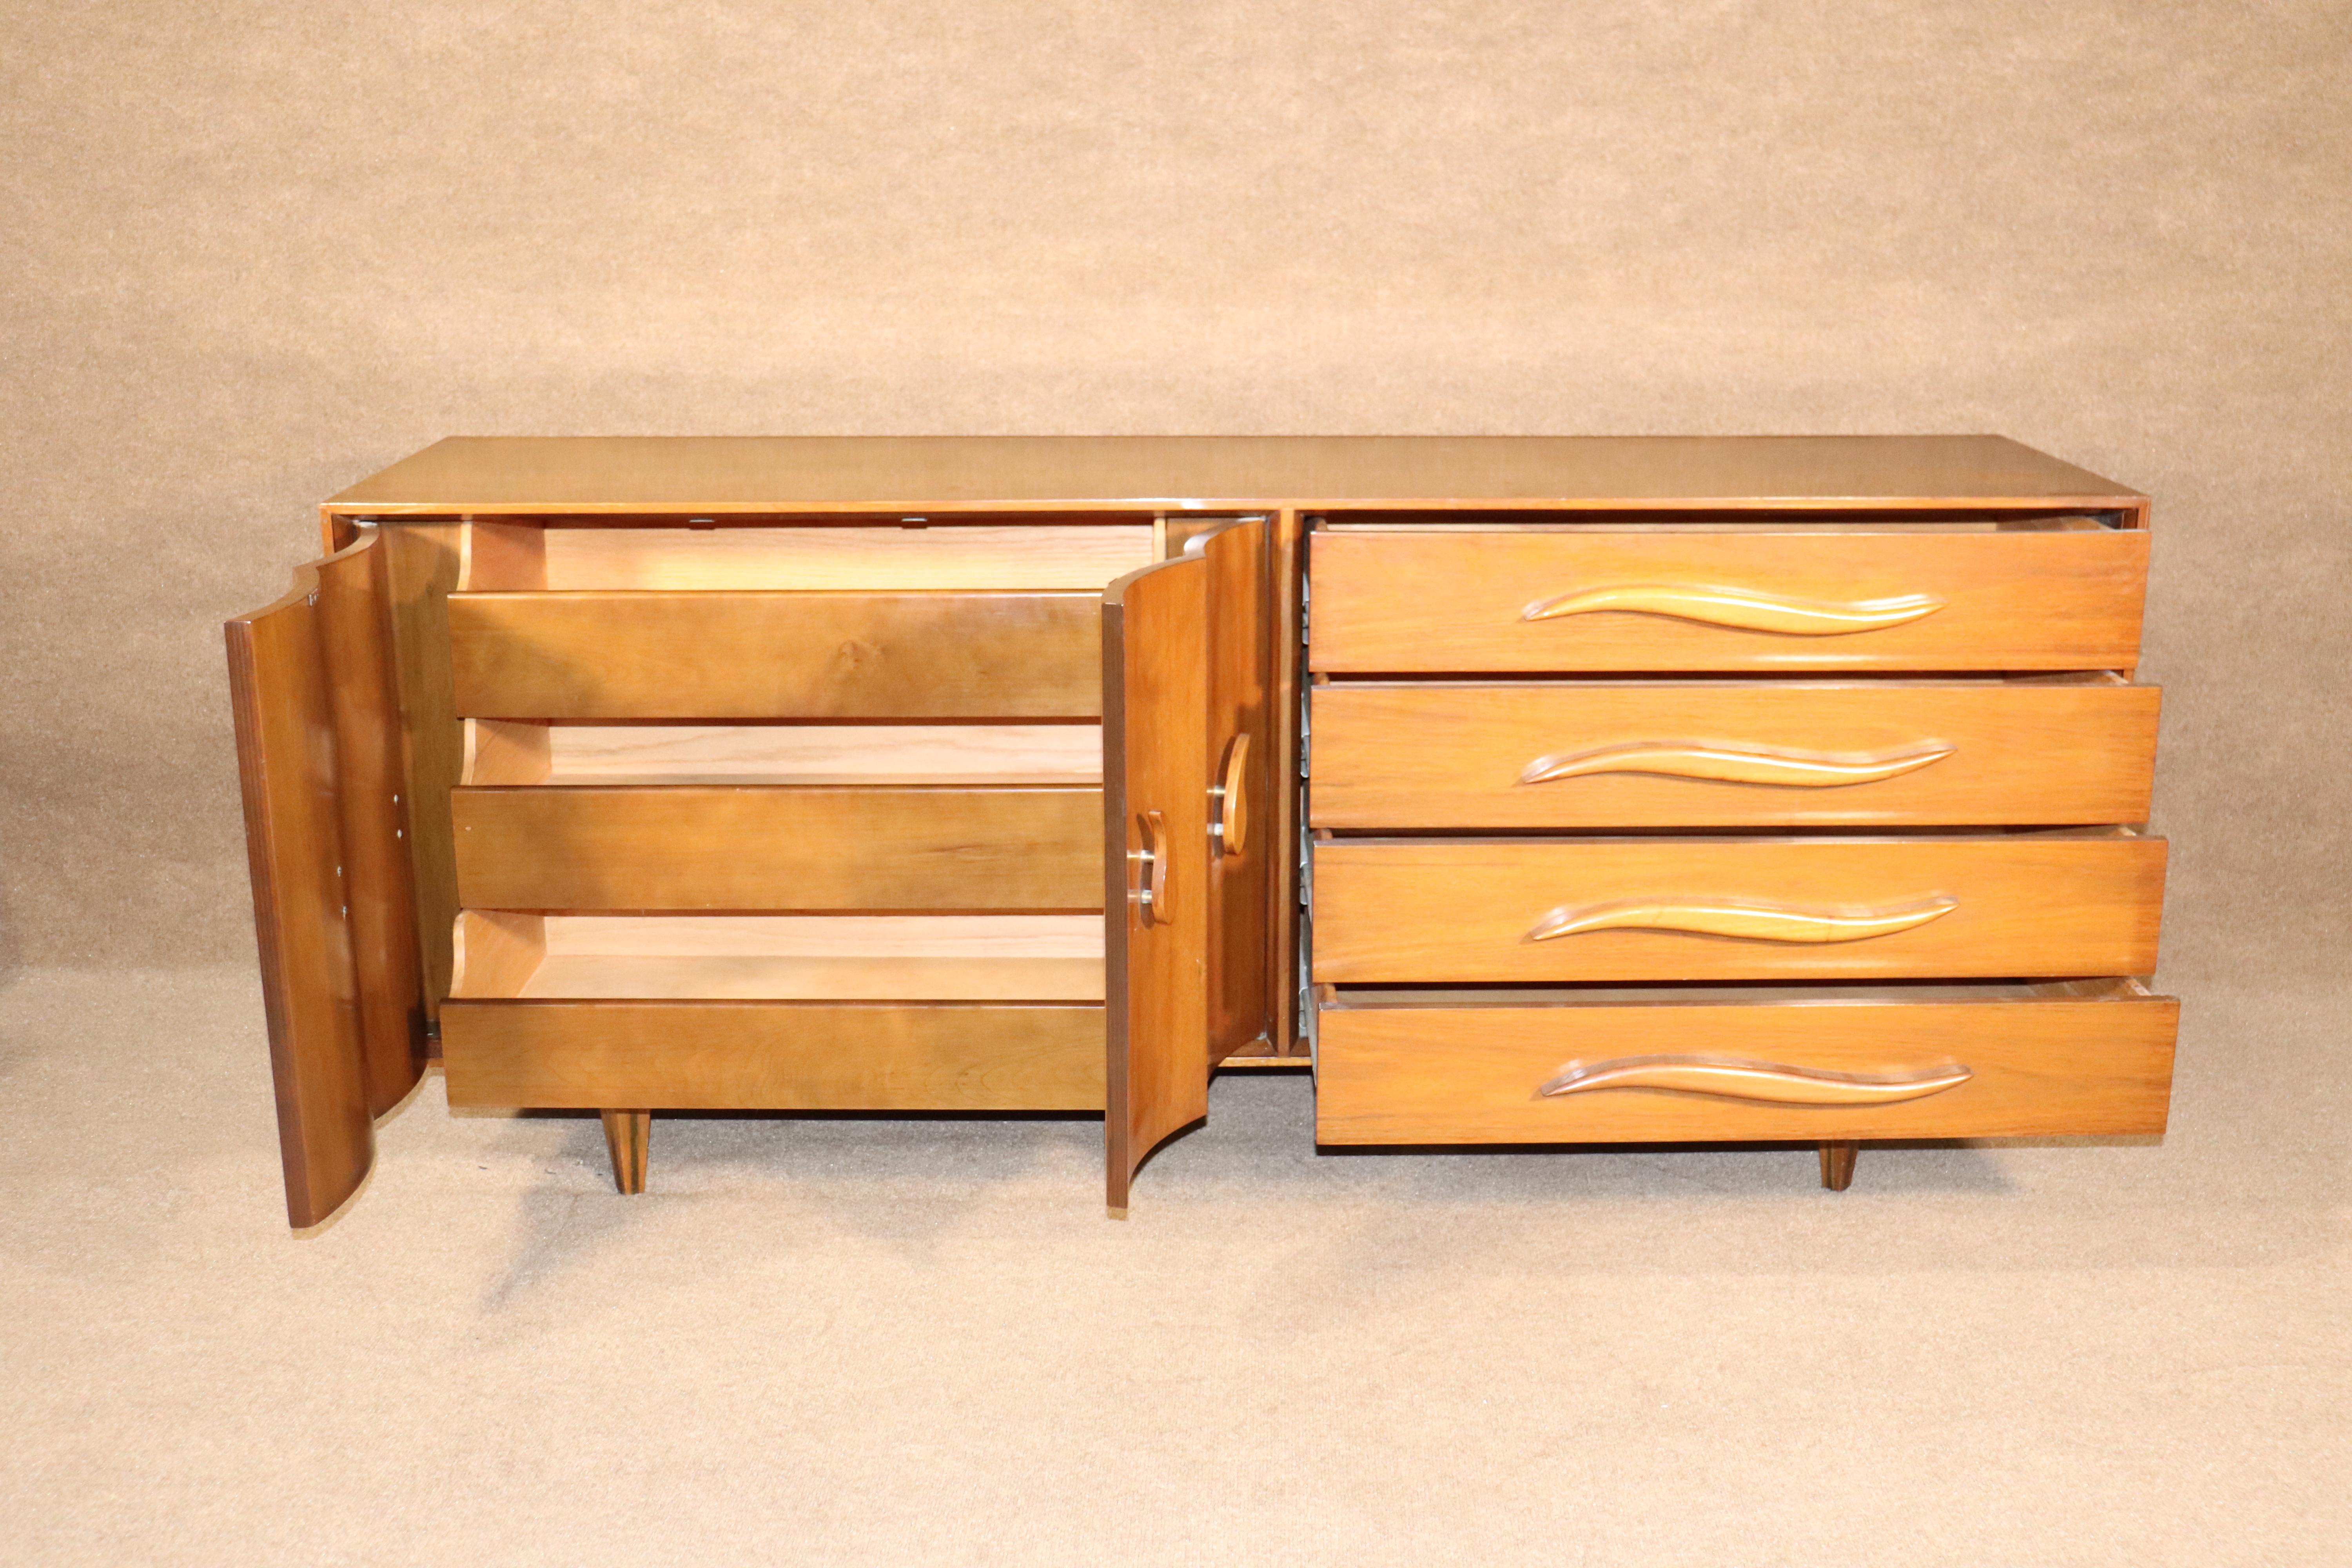 Mid-century modern dresser in walnut with seven wide drawers. Unique design with sculpted handles and brass inlay legs.
Please confirm location.
